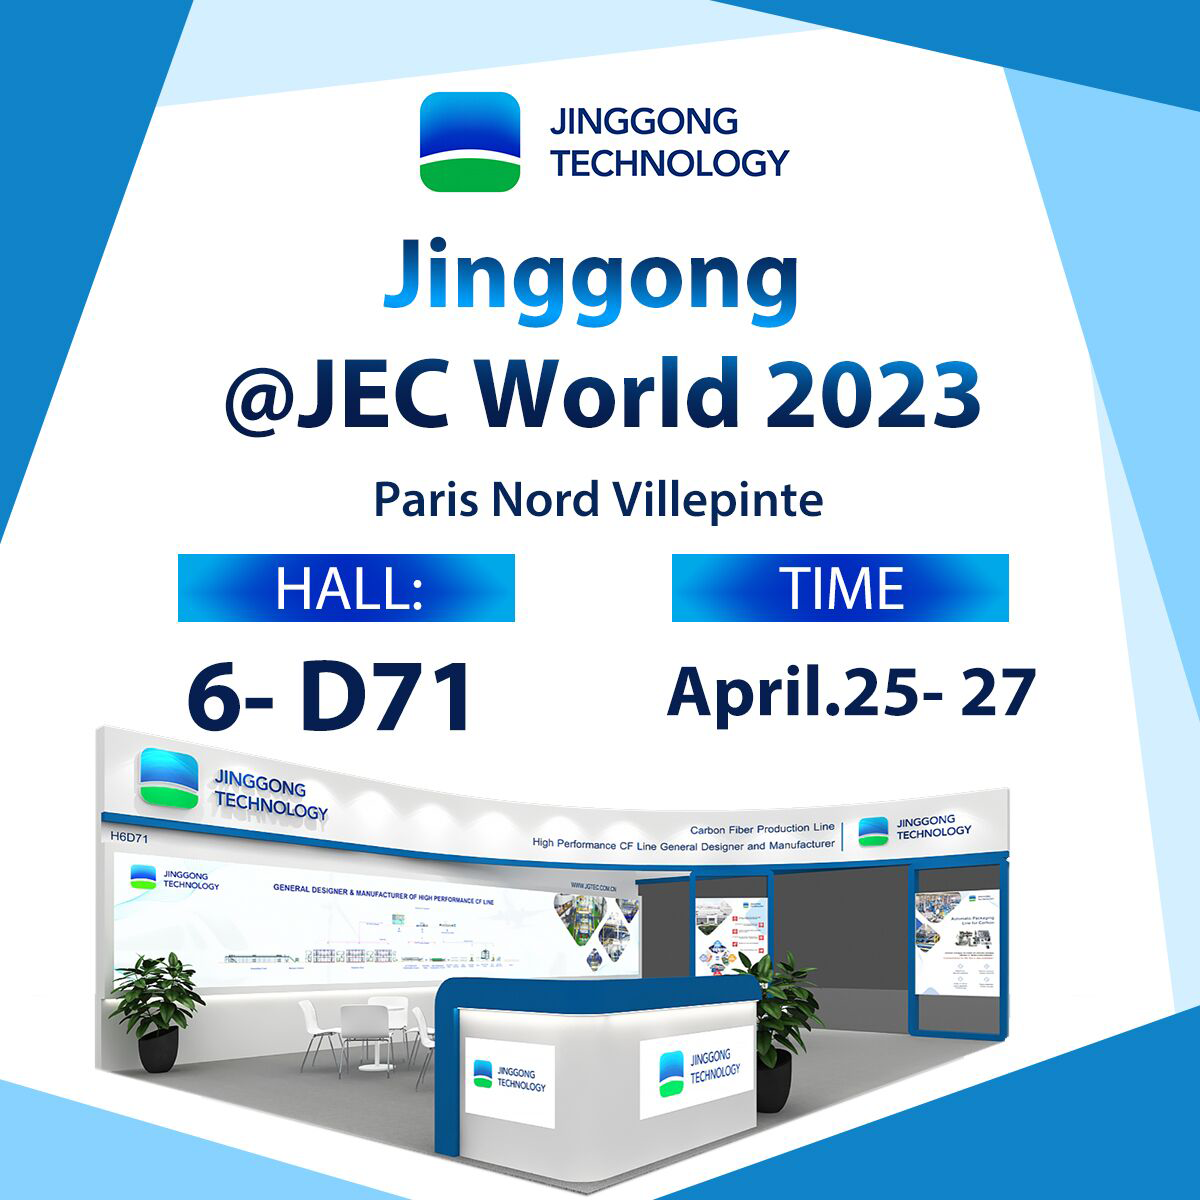 Welcome to Visit JINGGONG’s JEC Booth